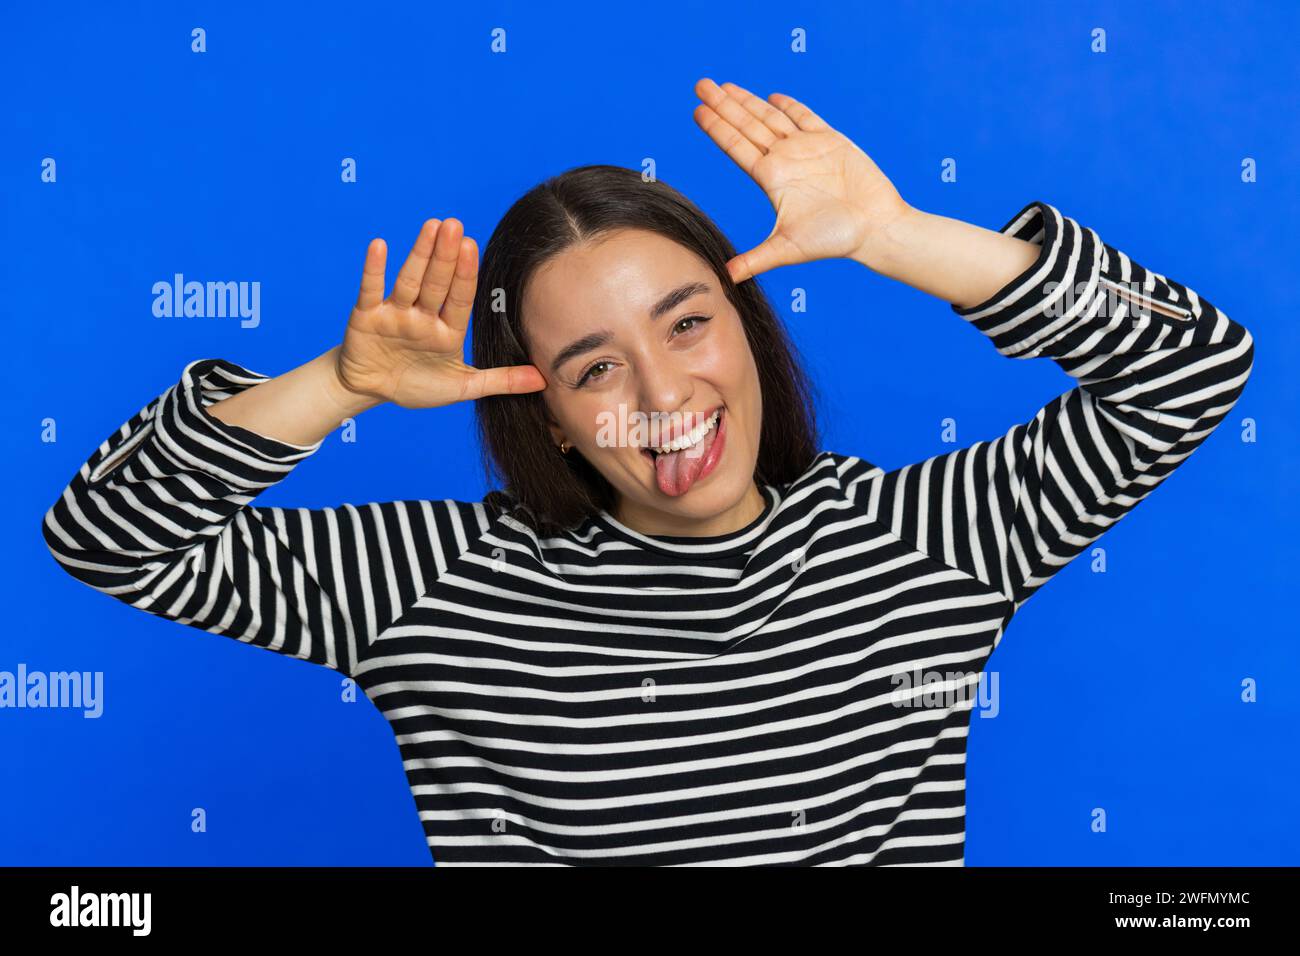 Funny Caucasian woman showing tongue making faces at camera, fooling around, joking, aping with silly face, teasing, bullying, abuse disrespect. Joyful young girl isolated on blue background indoors Stock Photo